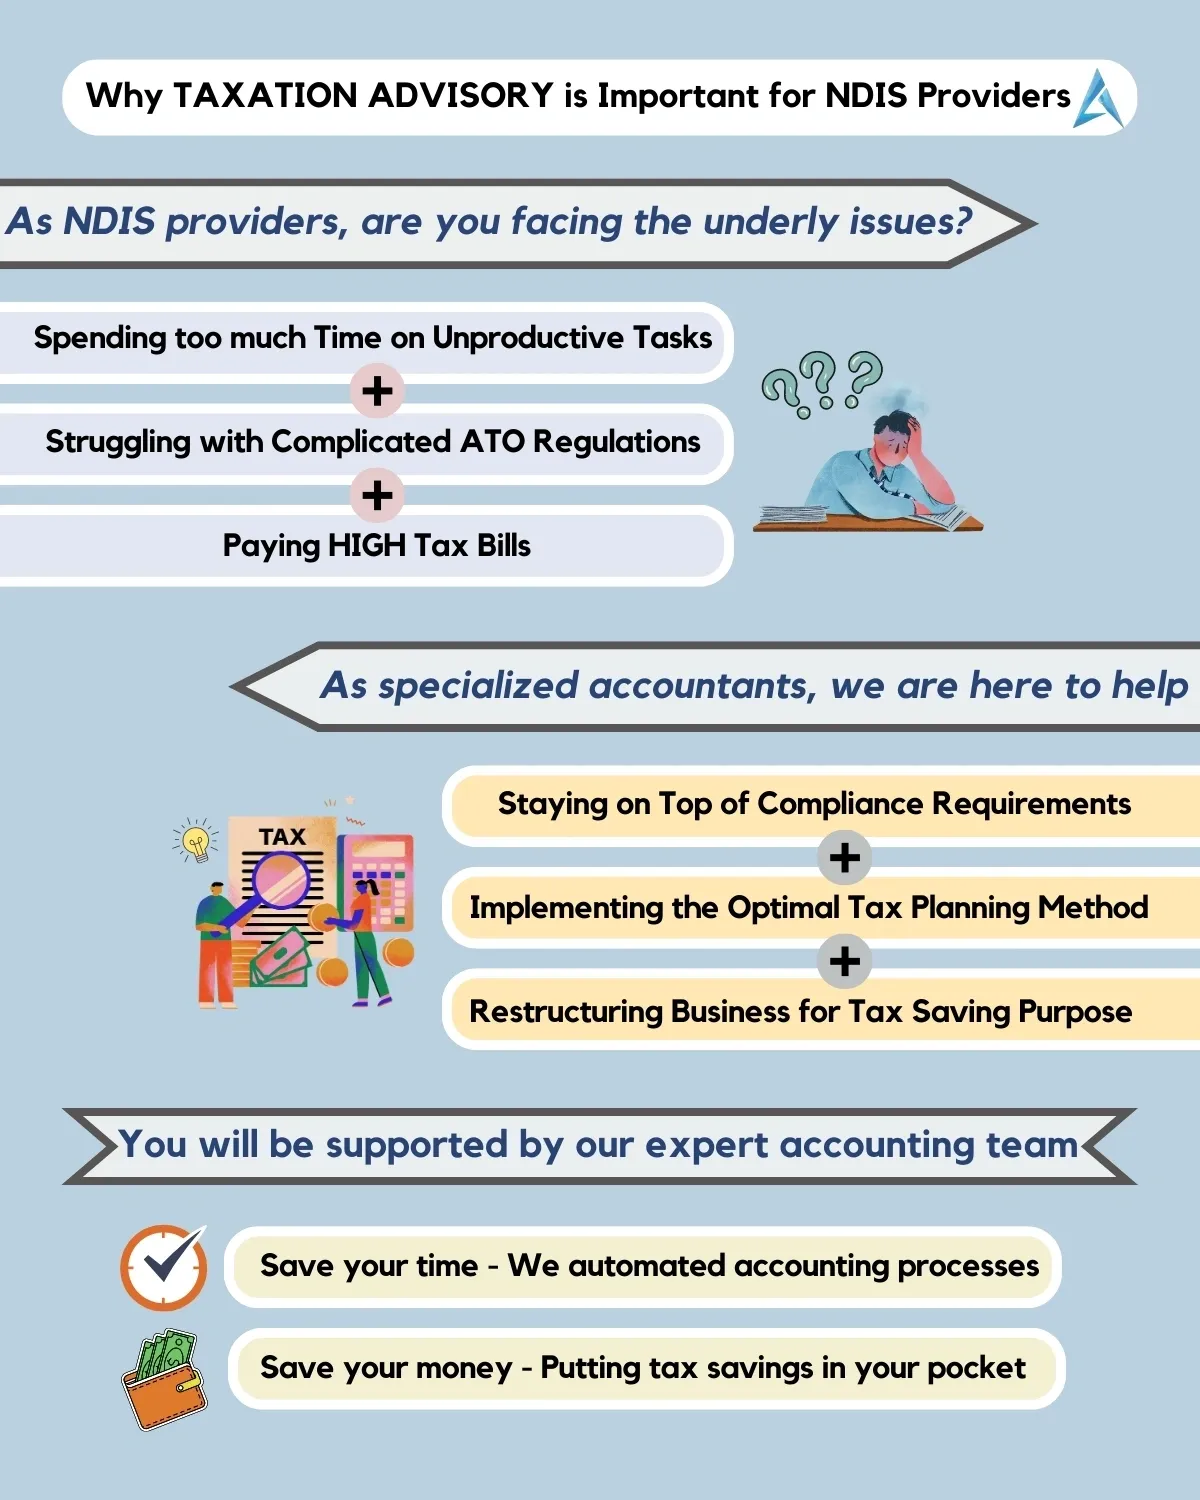 Why TAXATION ADVISORY is Important for NDIS Providers?